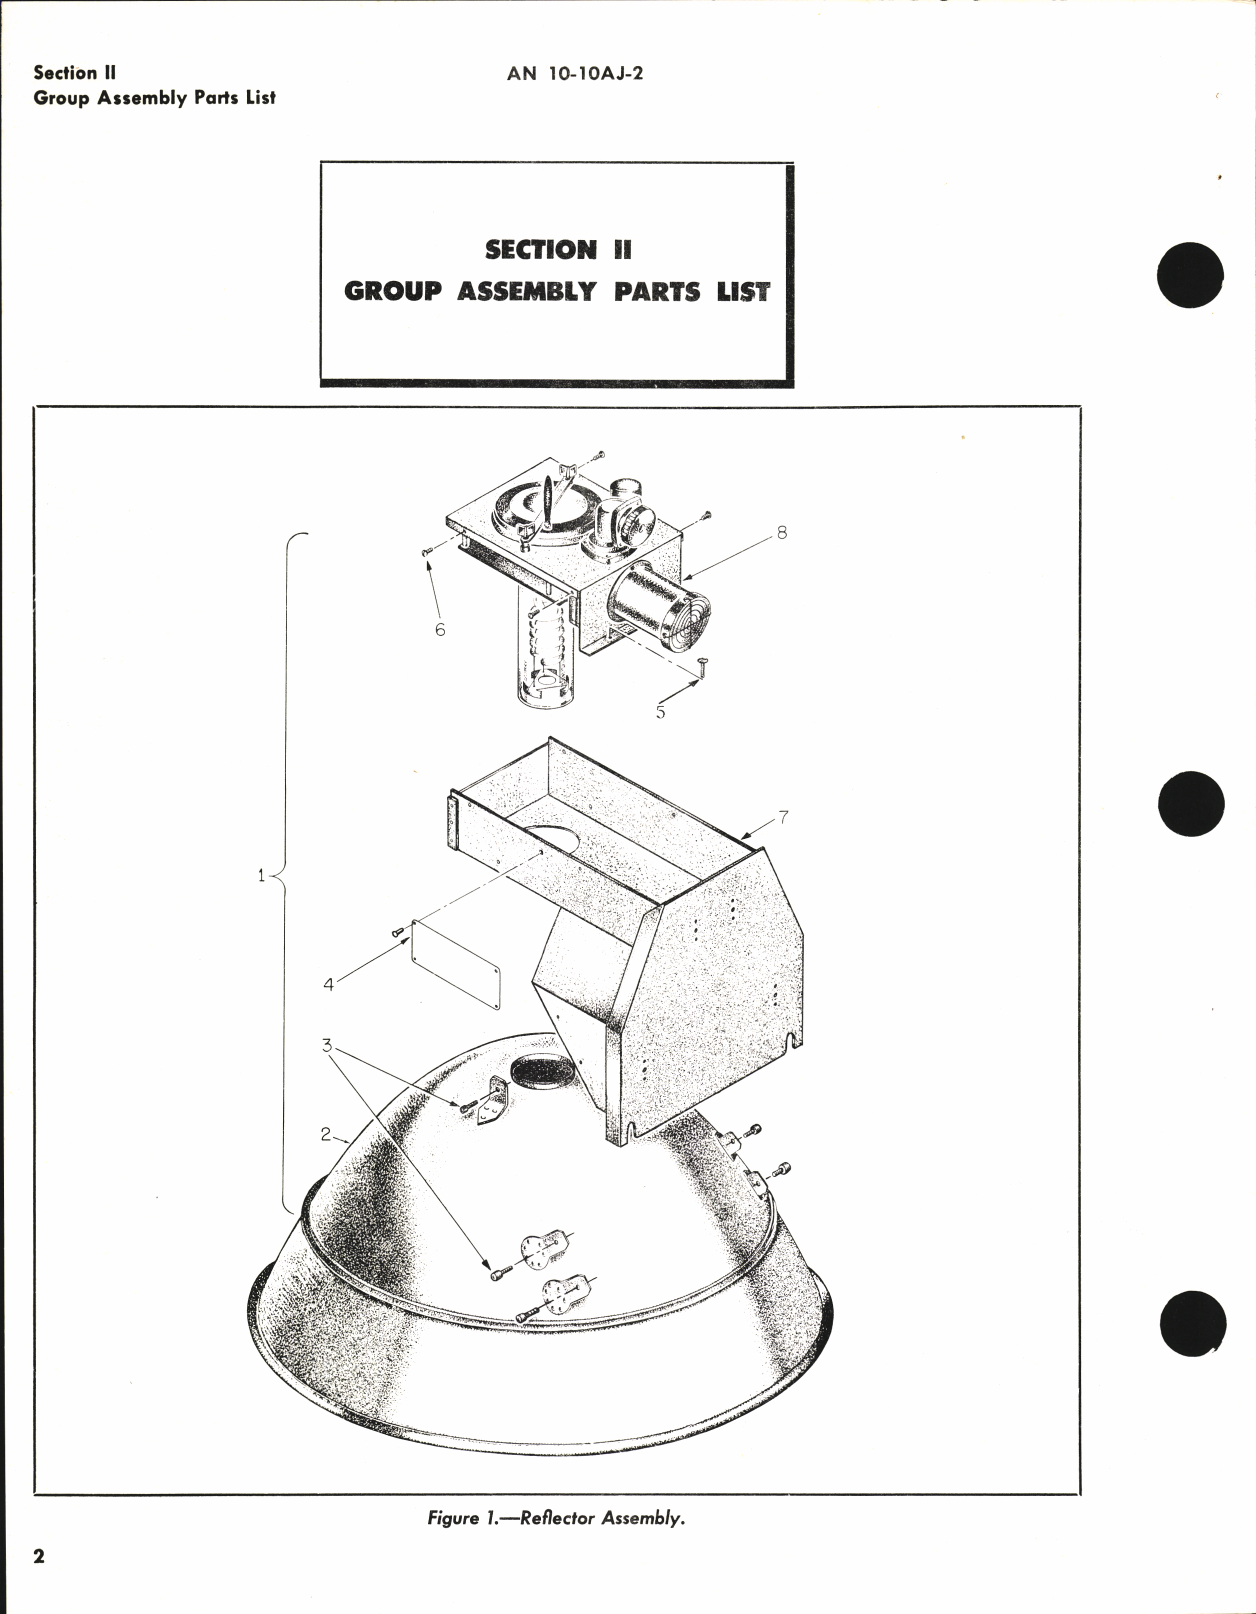 Sample page 6 from AirCorps Library document: Parts Catalog for Type D-6 Photographic Lamp Assembly